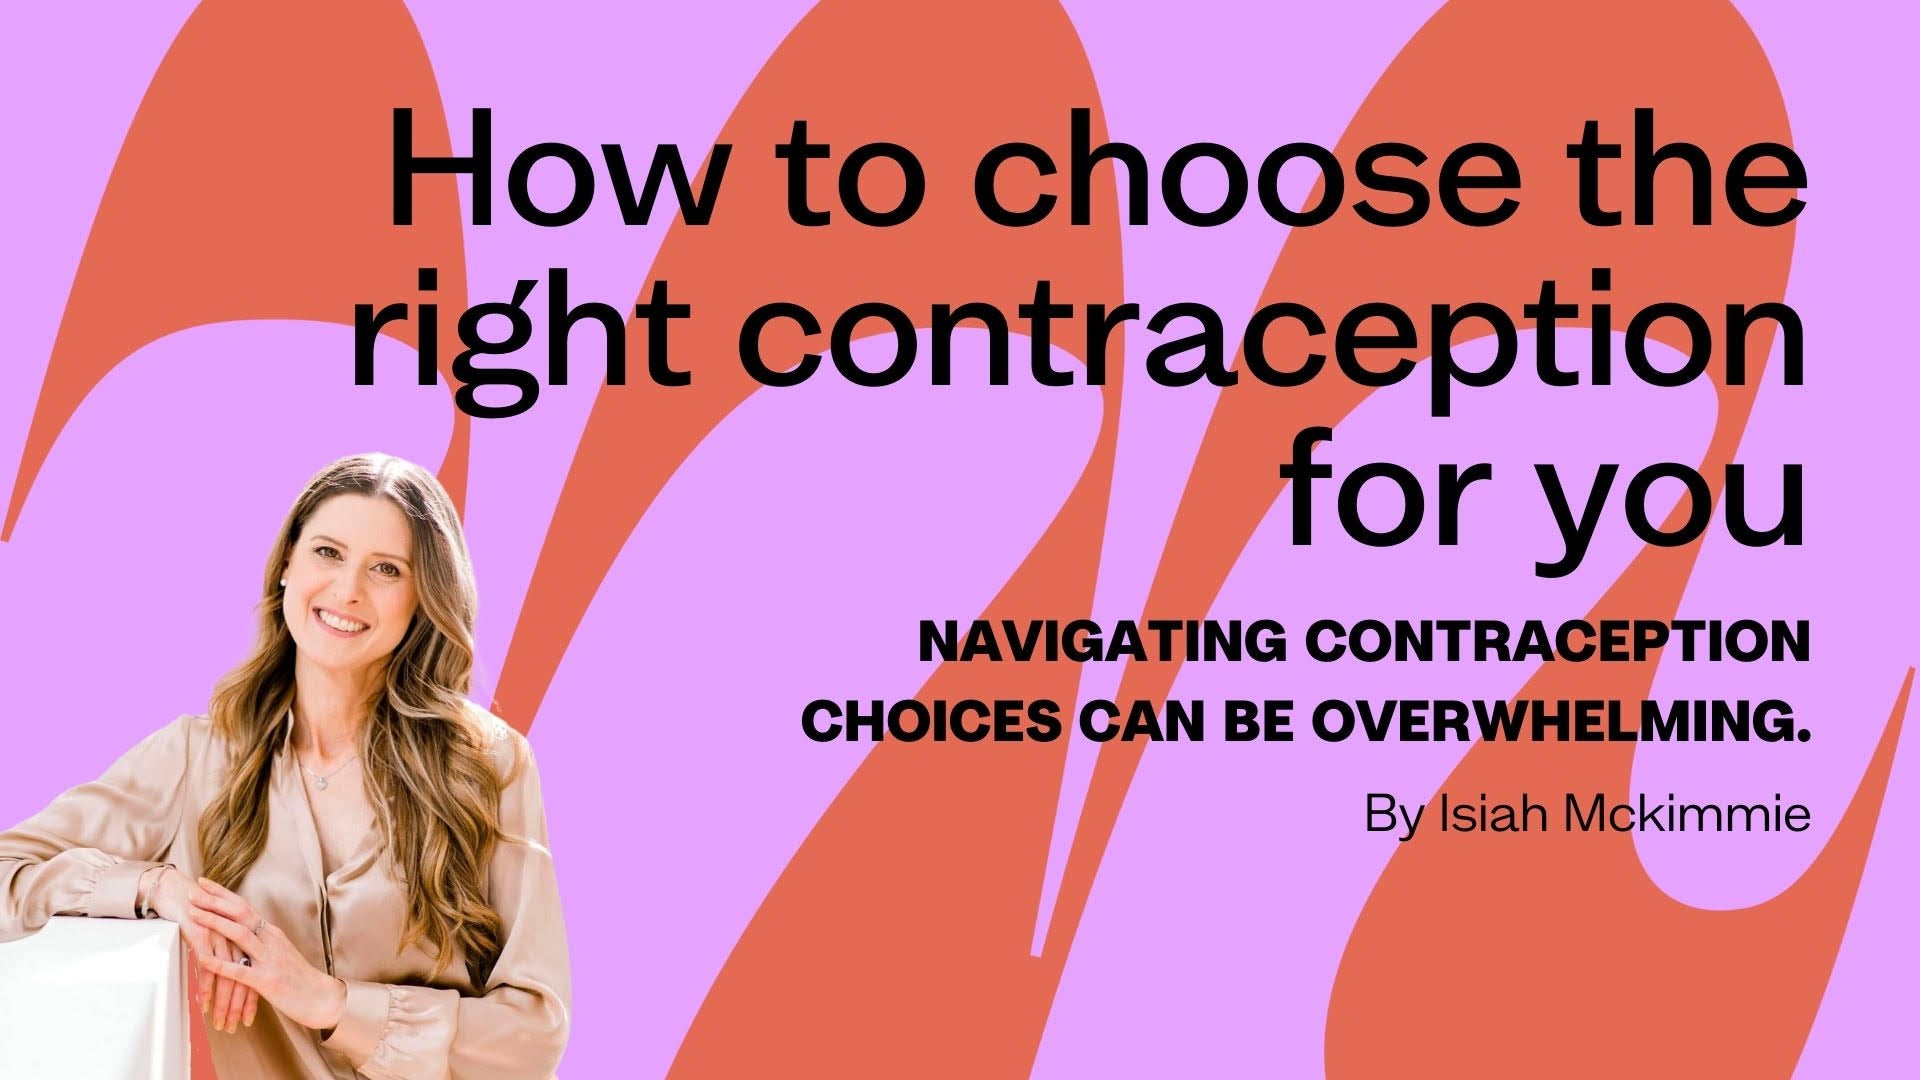 How to choose the right contraception for you